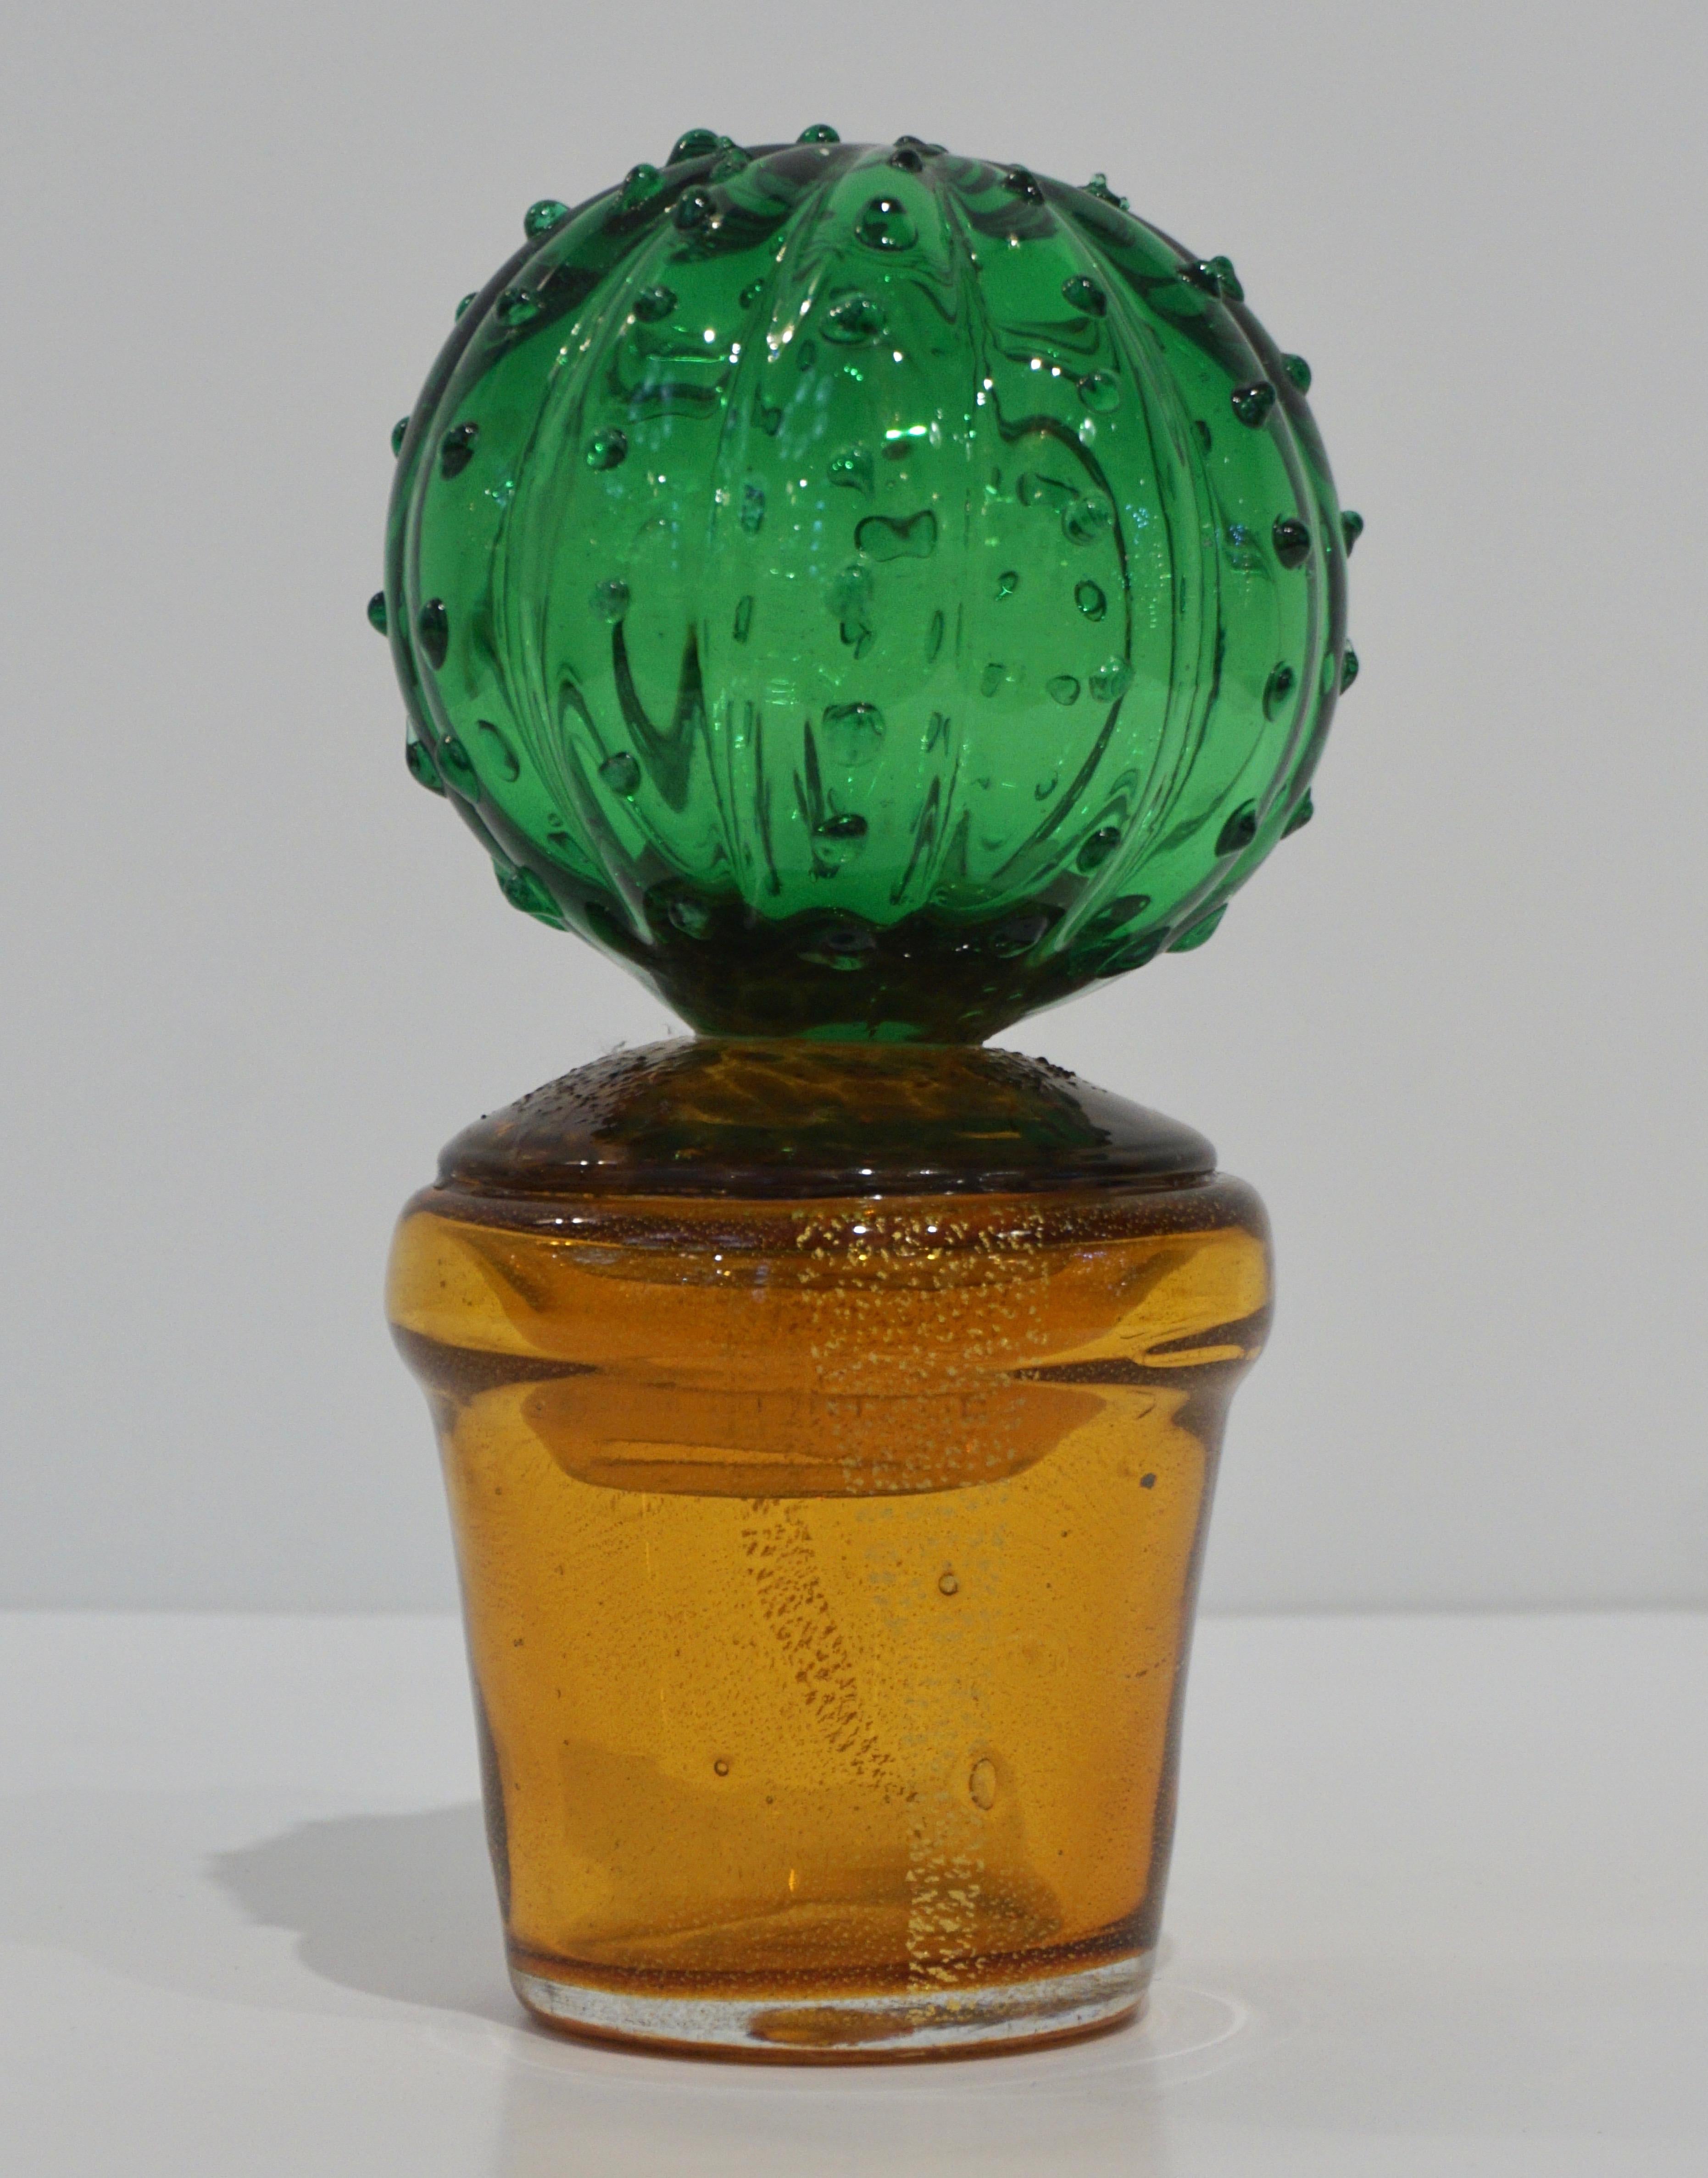 1990s Italian highly collectible Venetian glass cactus of limited edition, entirely handcrafted in Murano, with modern Minimalist design blown by Formia, in a lifelike organic modernist shape in blown transparent vivid green Murano glass highlighted